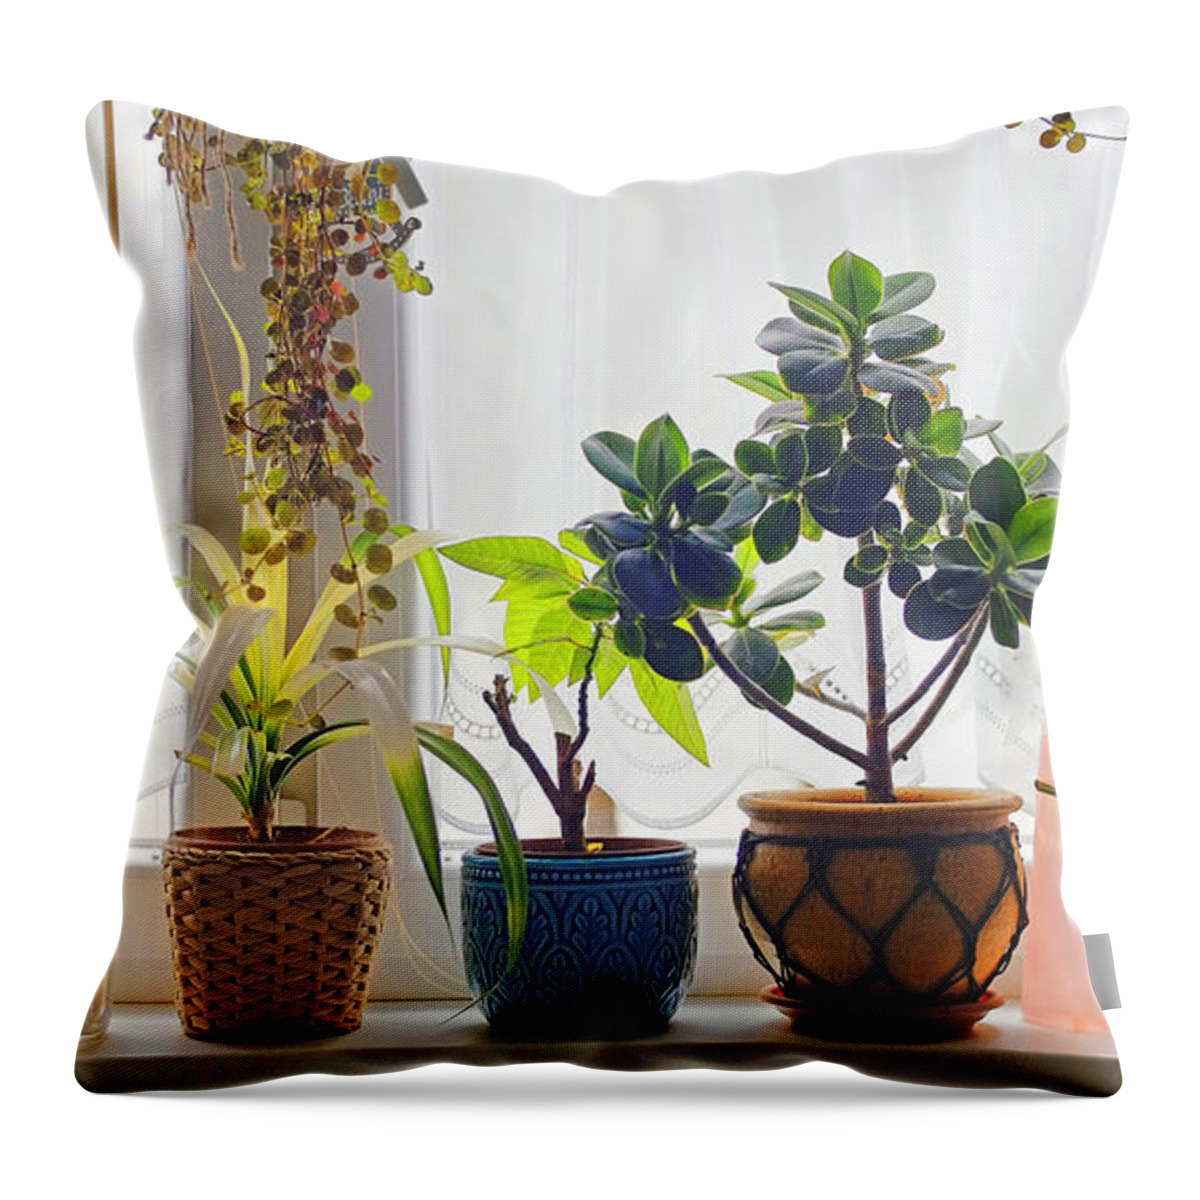 Windows Throw Pillow featuring the mixed media Windows With Curtains And Plants by Sandi OReilly